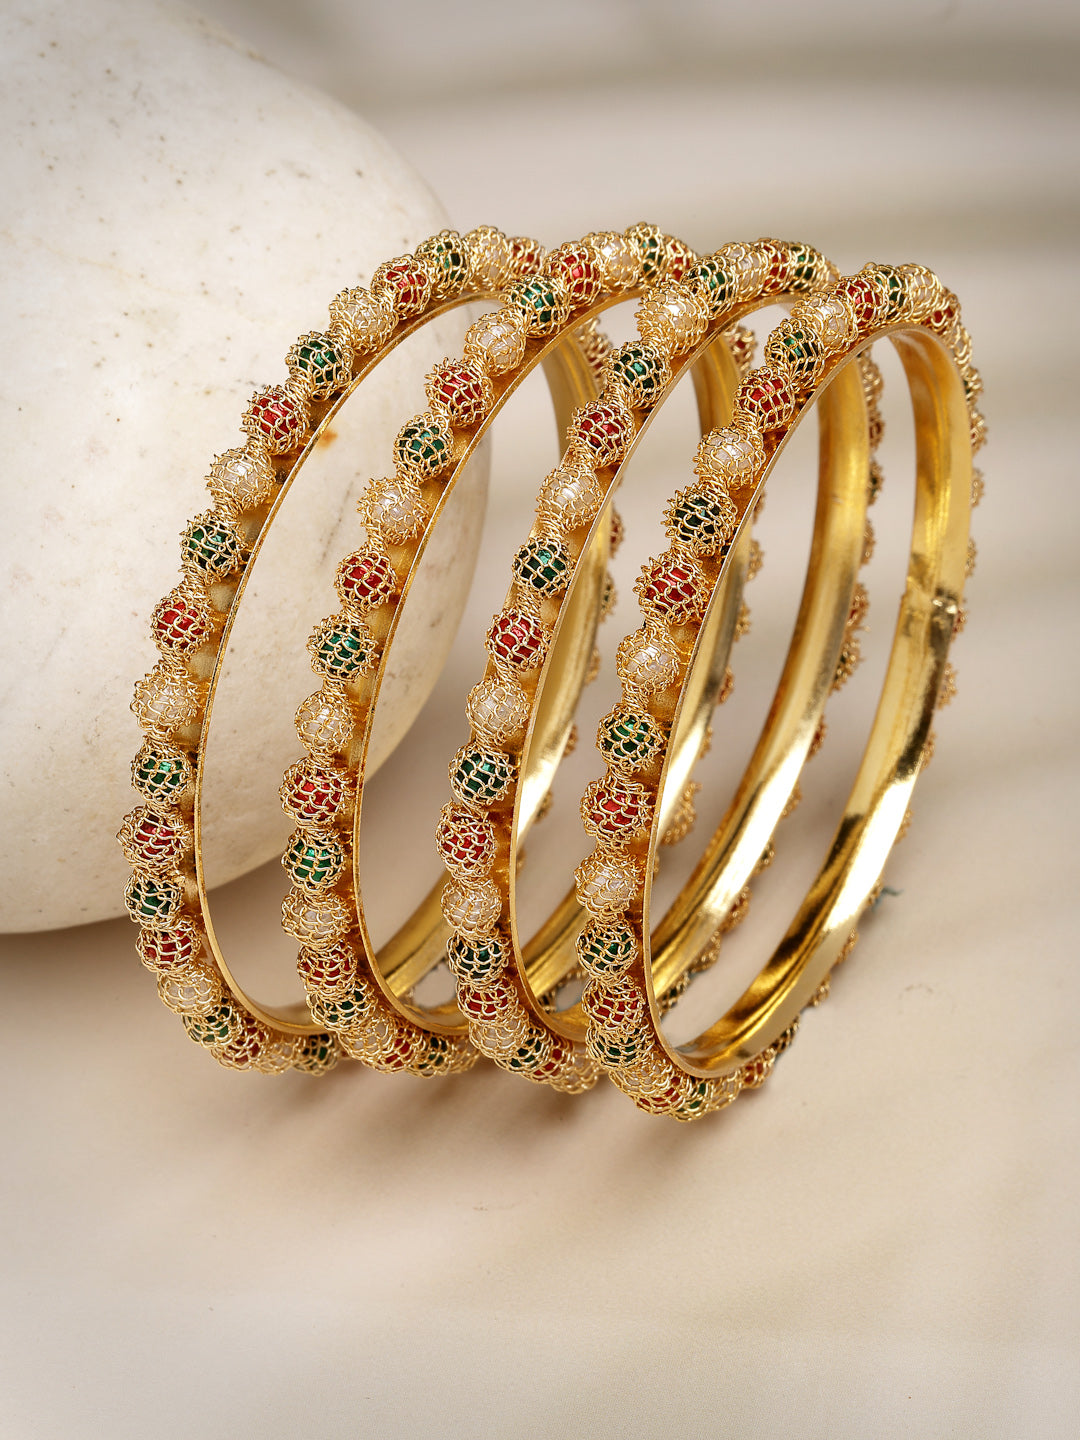 Women's Set Of 4 Gold-Plated Beads Handcrafted Traditional Bangles - Nvr